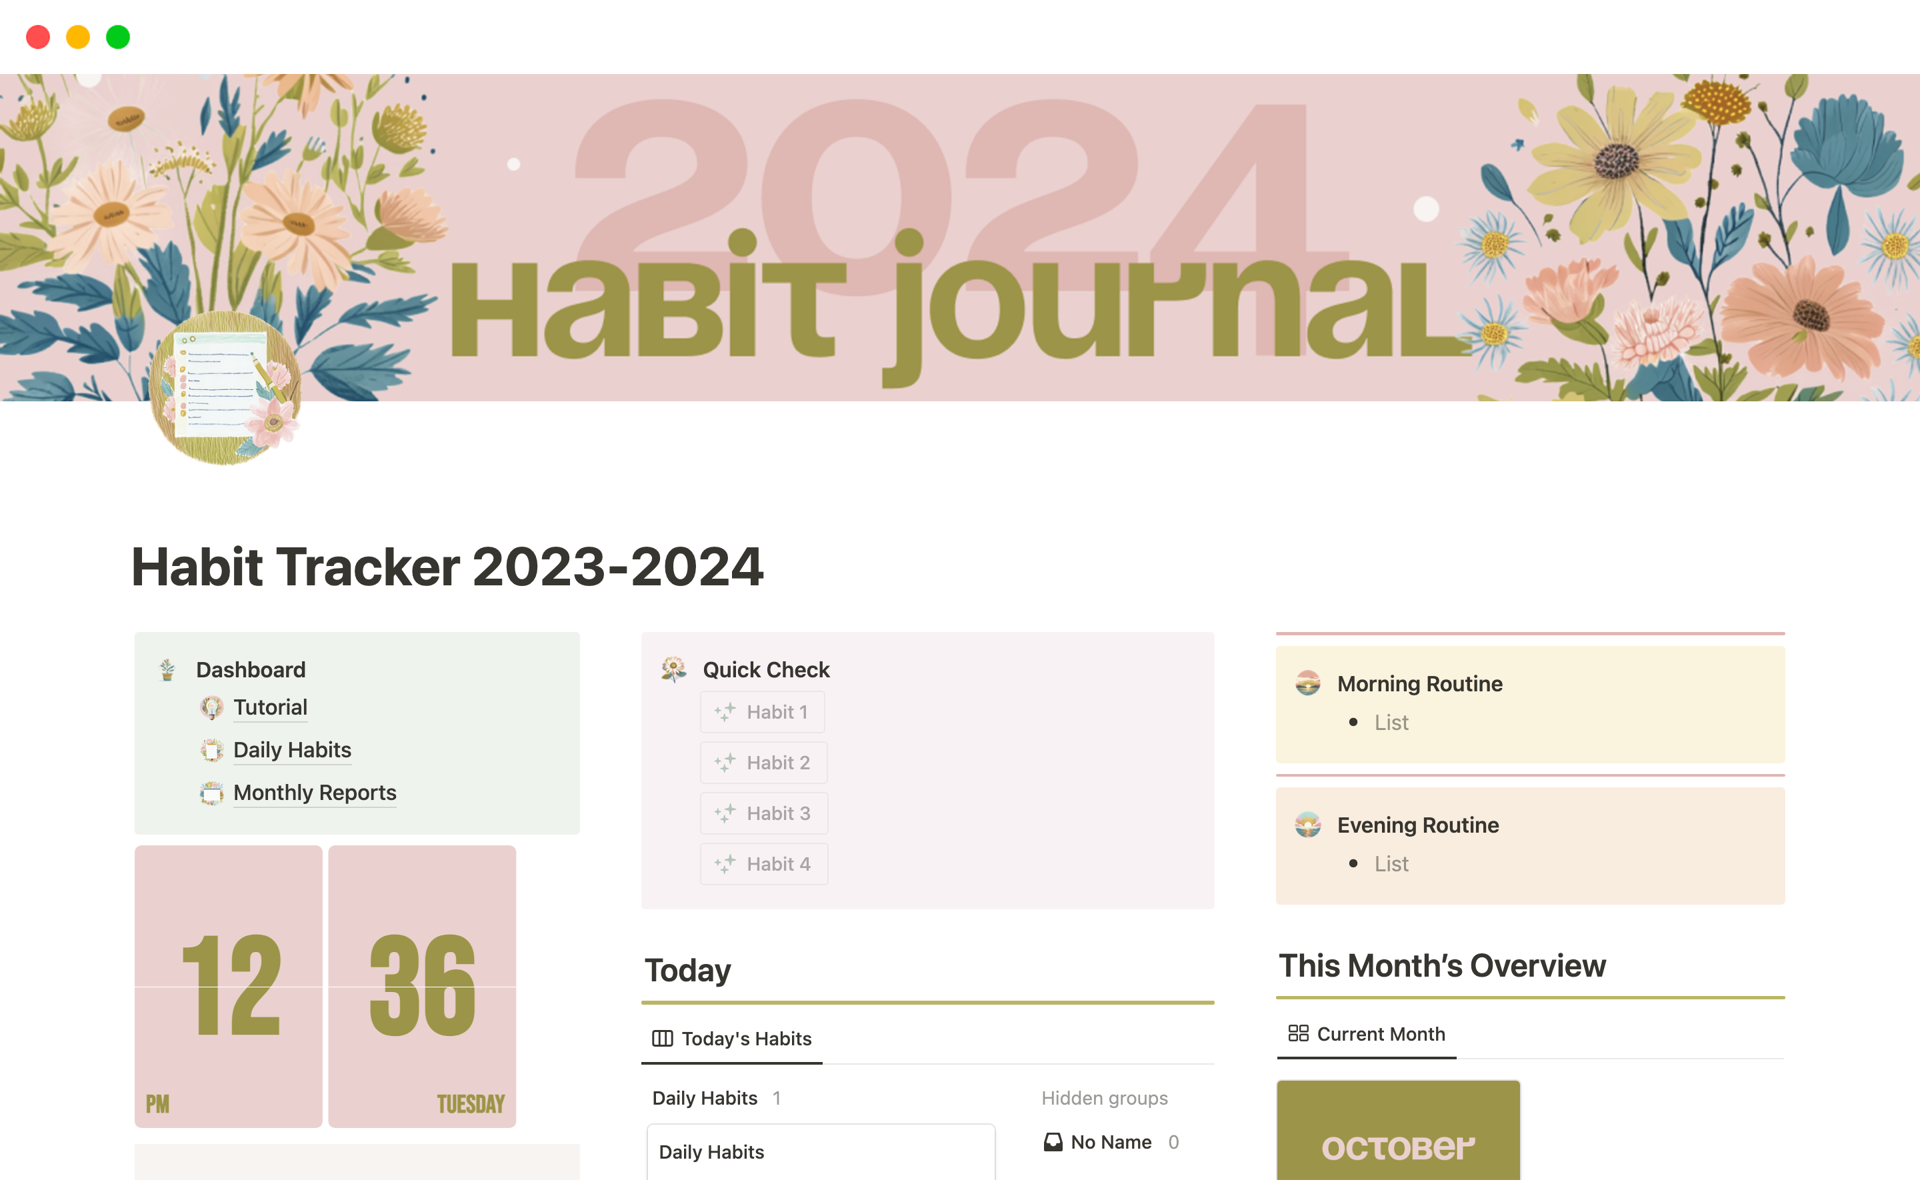 Customized Habit Tracker for 2023-2024 with monthly statistics